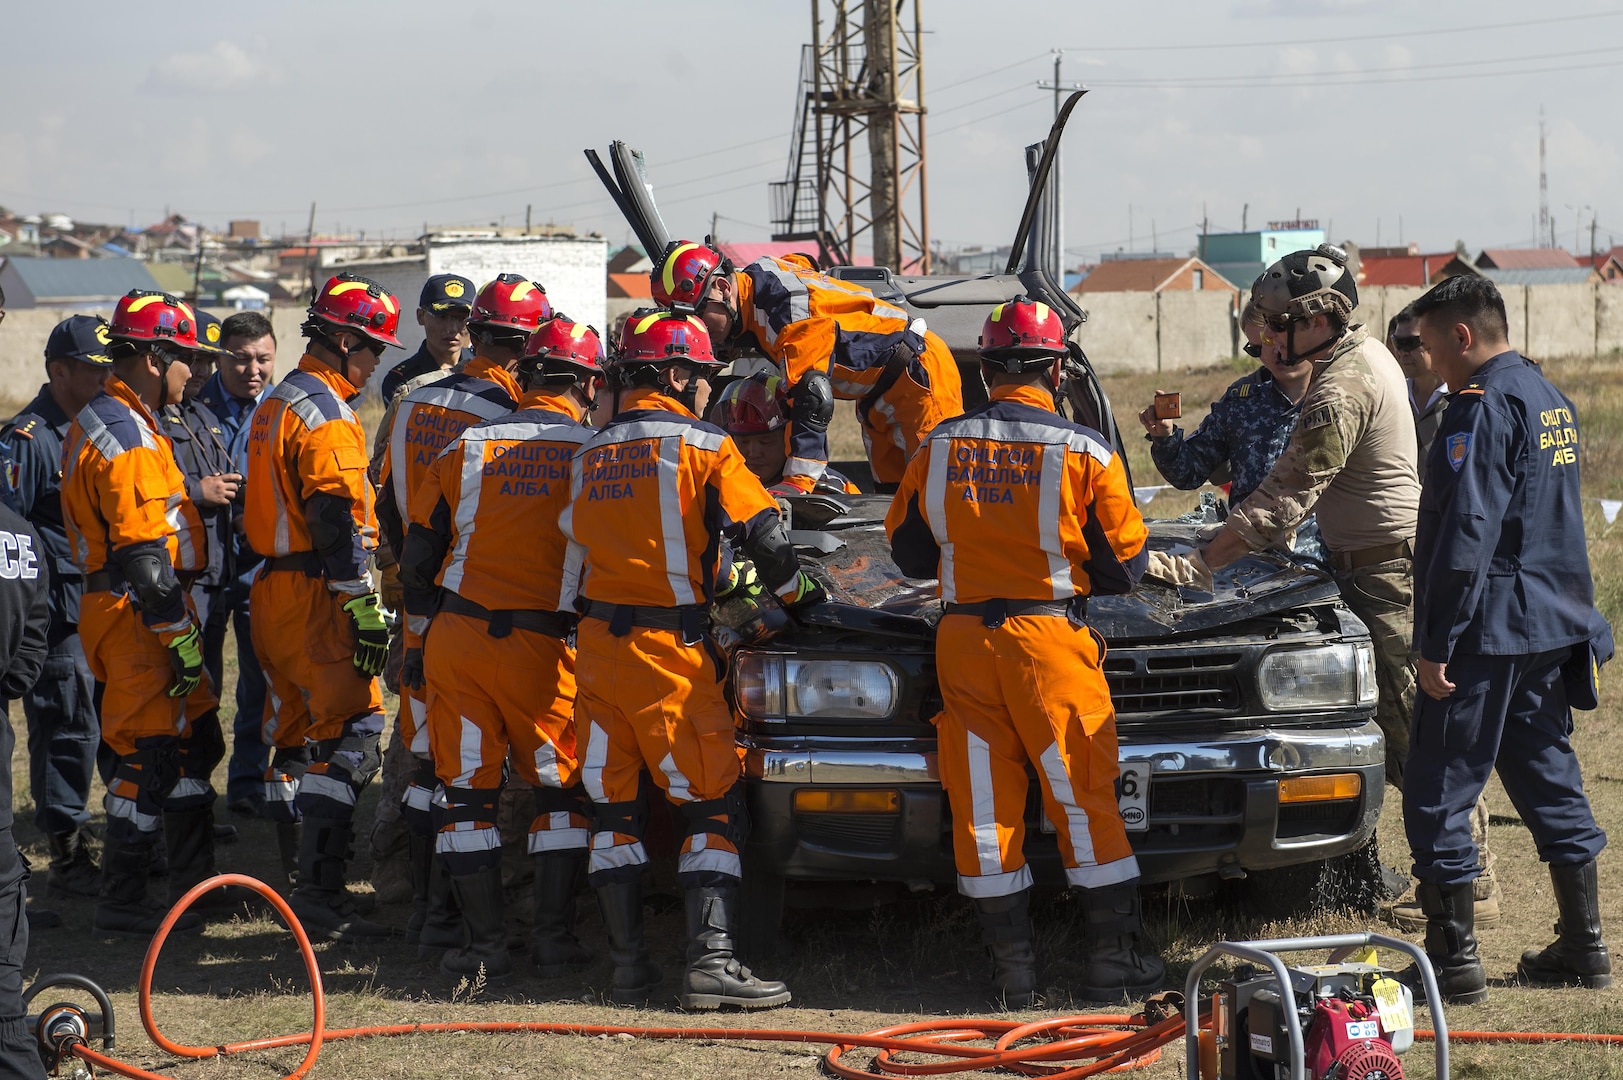 Mongolian emergency management personnel practice vehicle extrication techniques with members of the U.S. Air Force during a Disaster Management Leadership Seminar in Ulaanbaatar, Mongolia, Sept. 21, 2016. The five-day seminar is a subject matter expert exchange between the U.S. and Mongolia. The Mongolia National Emergency Management Agency hosted the exchange, partnering with U.S. service members from Special Operations Command, Pacific. 